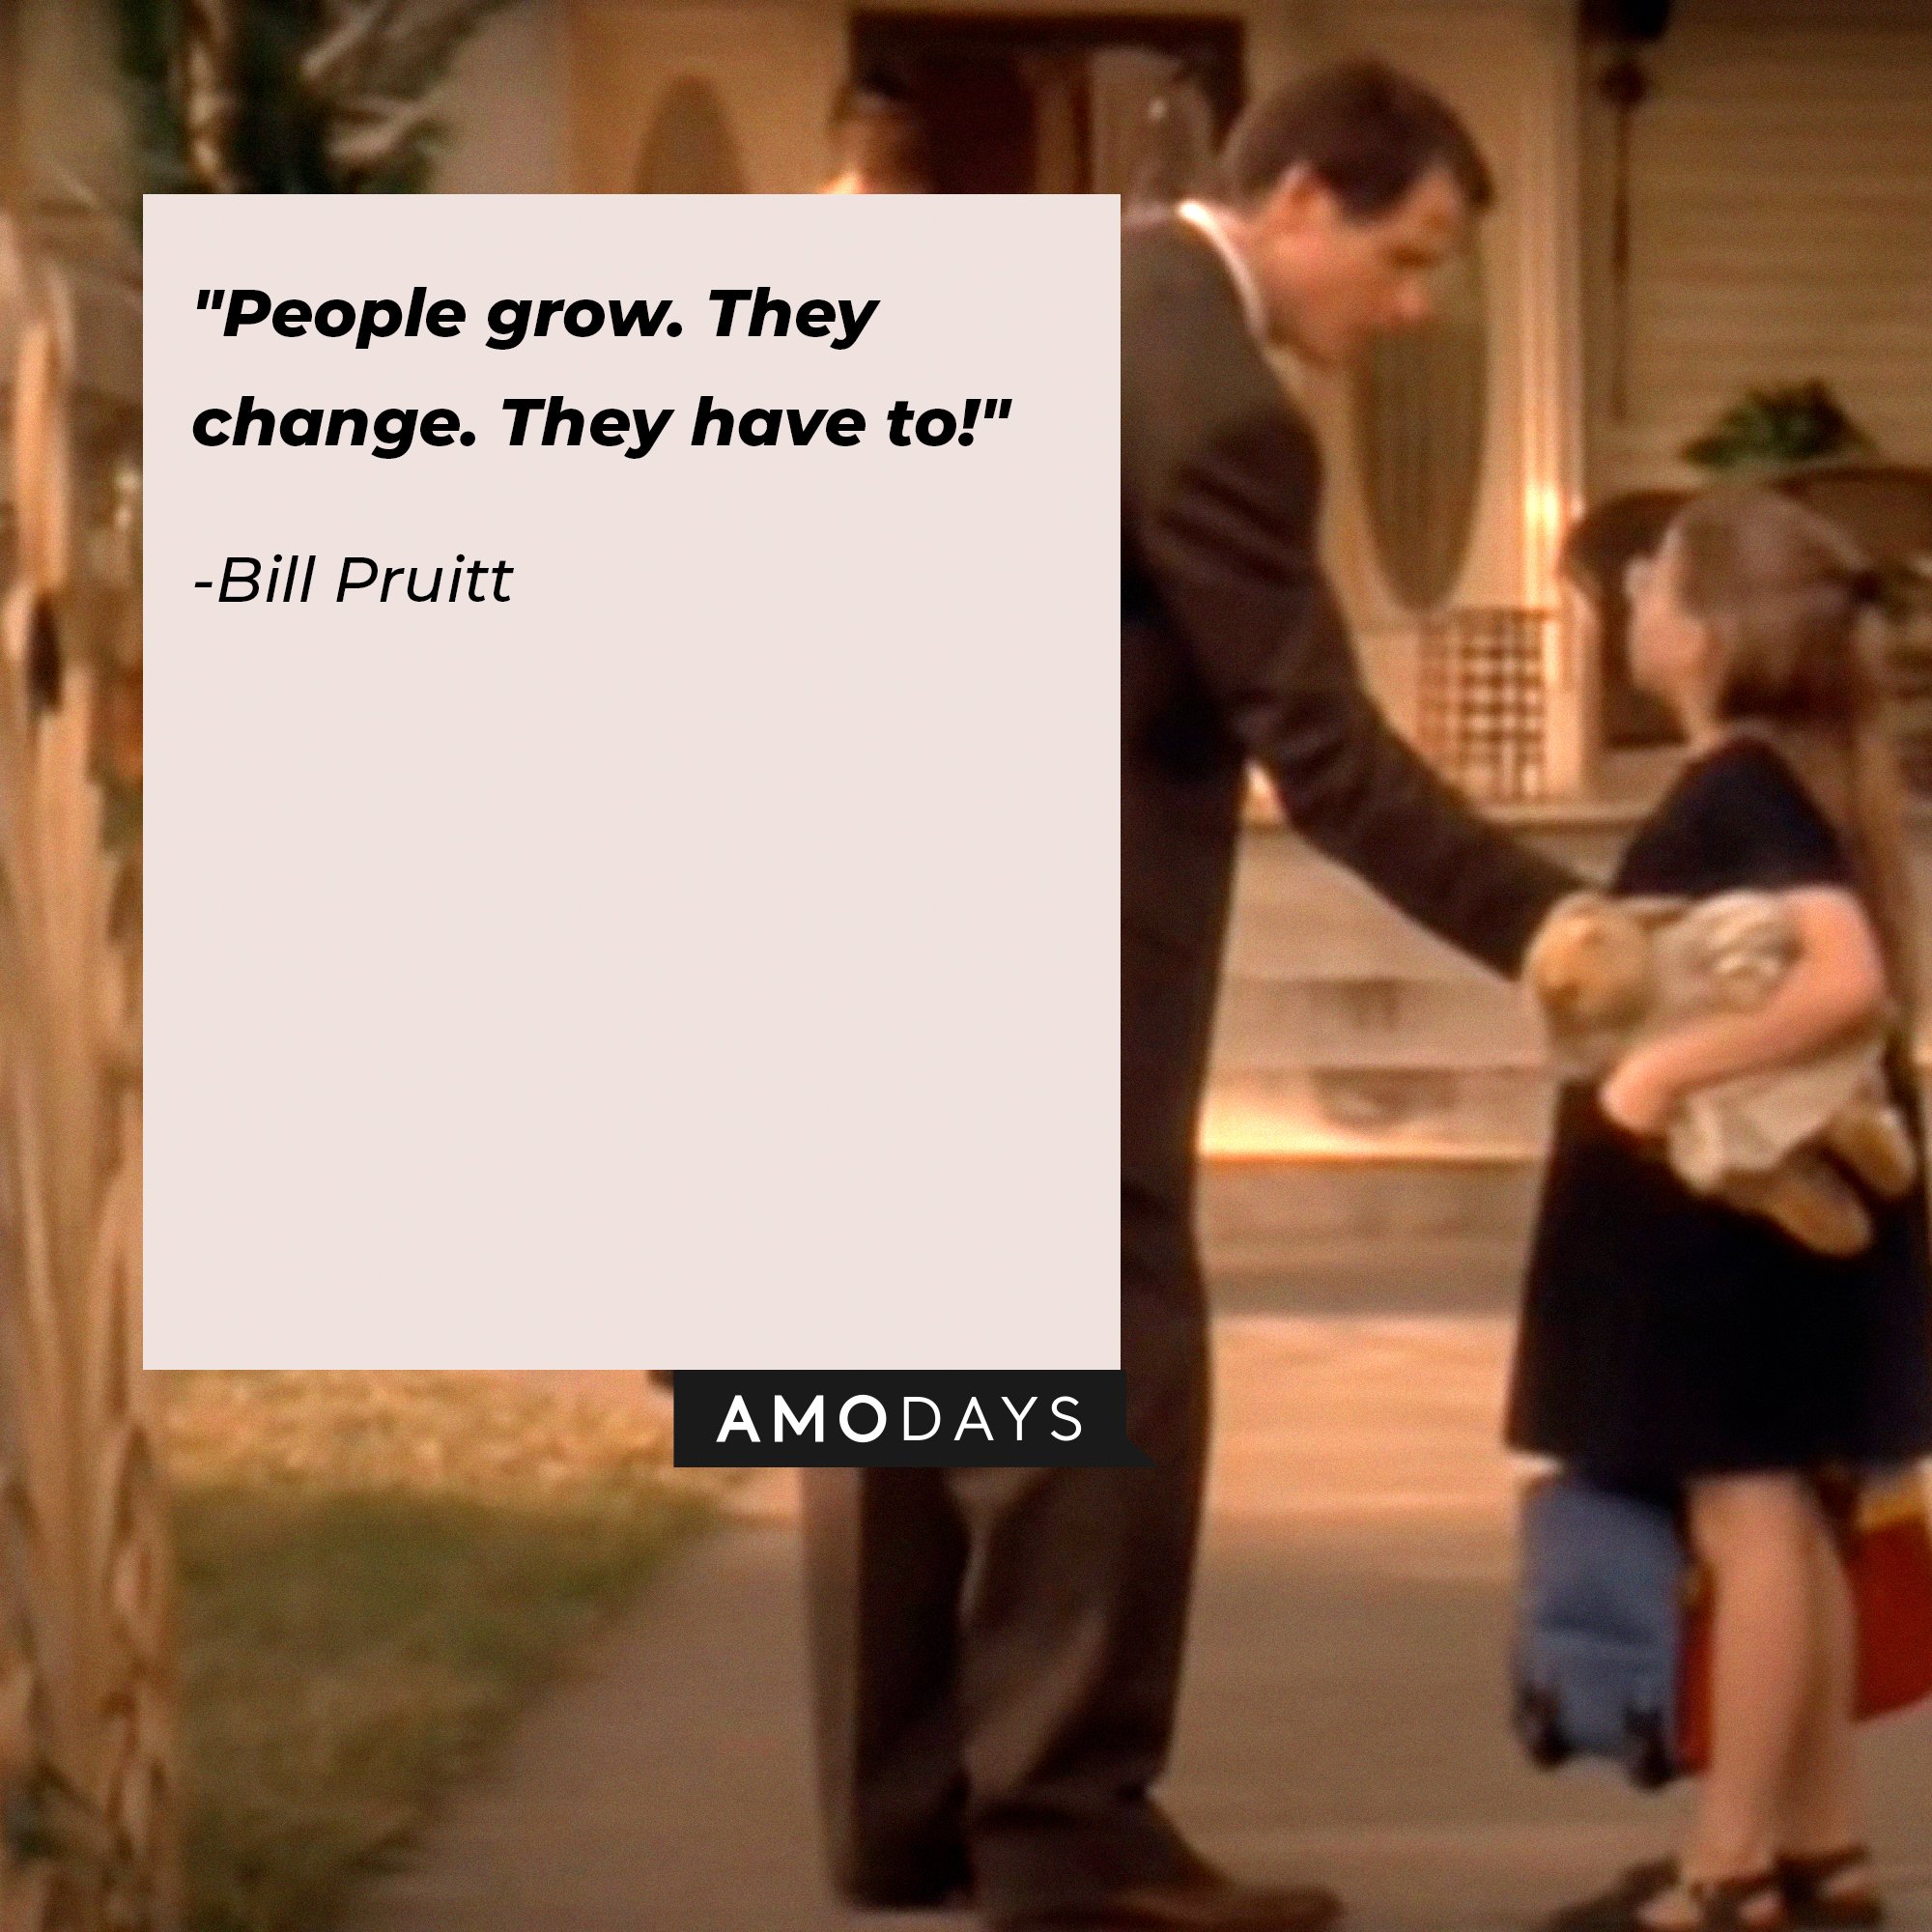 Bill Pruitt’s quote: "People grow. They change. They have to!"  | Image: AmoDays